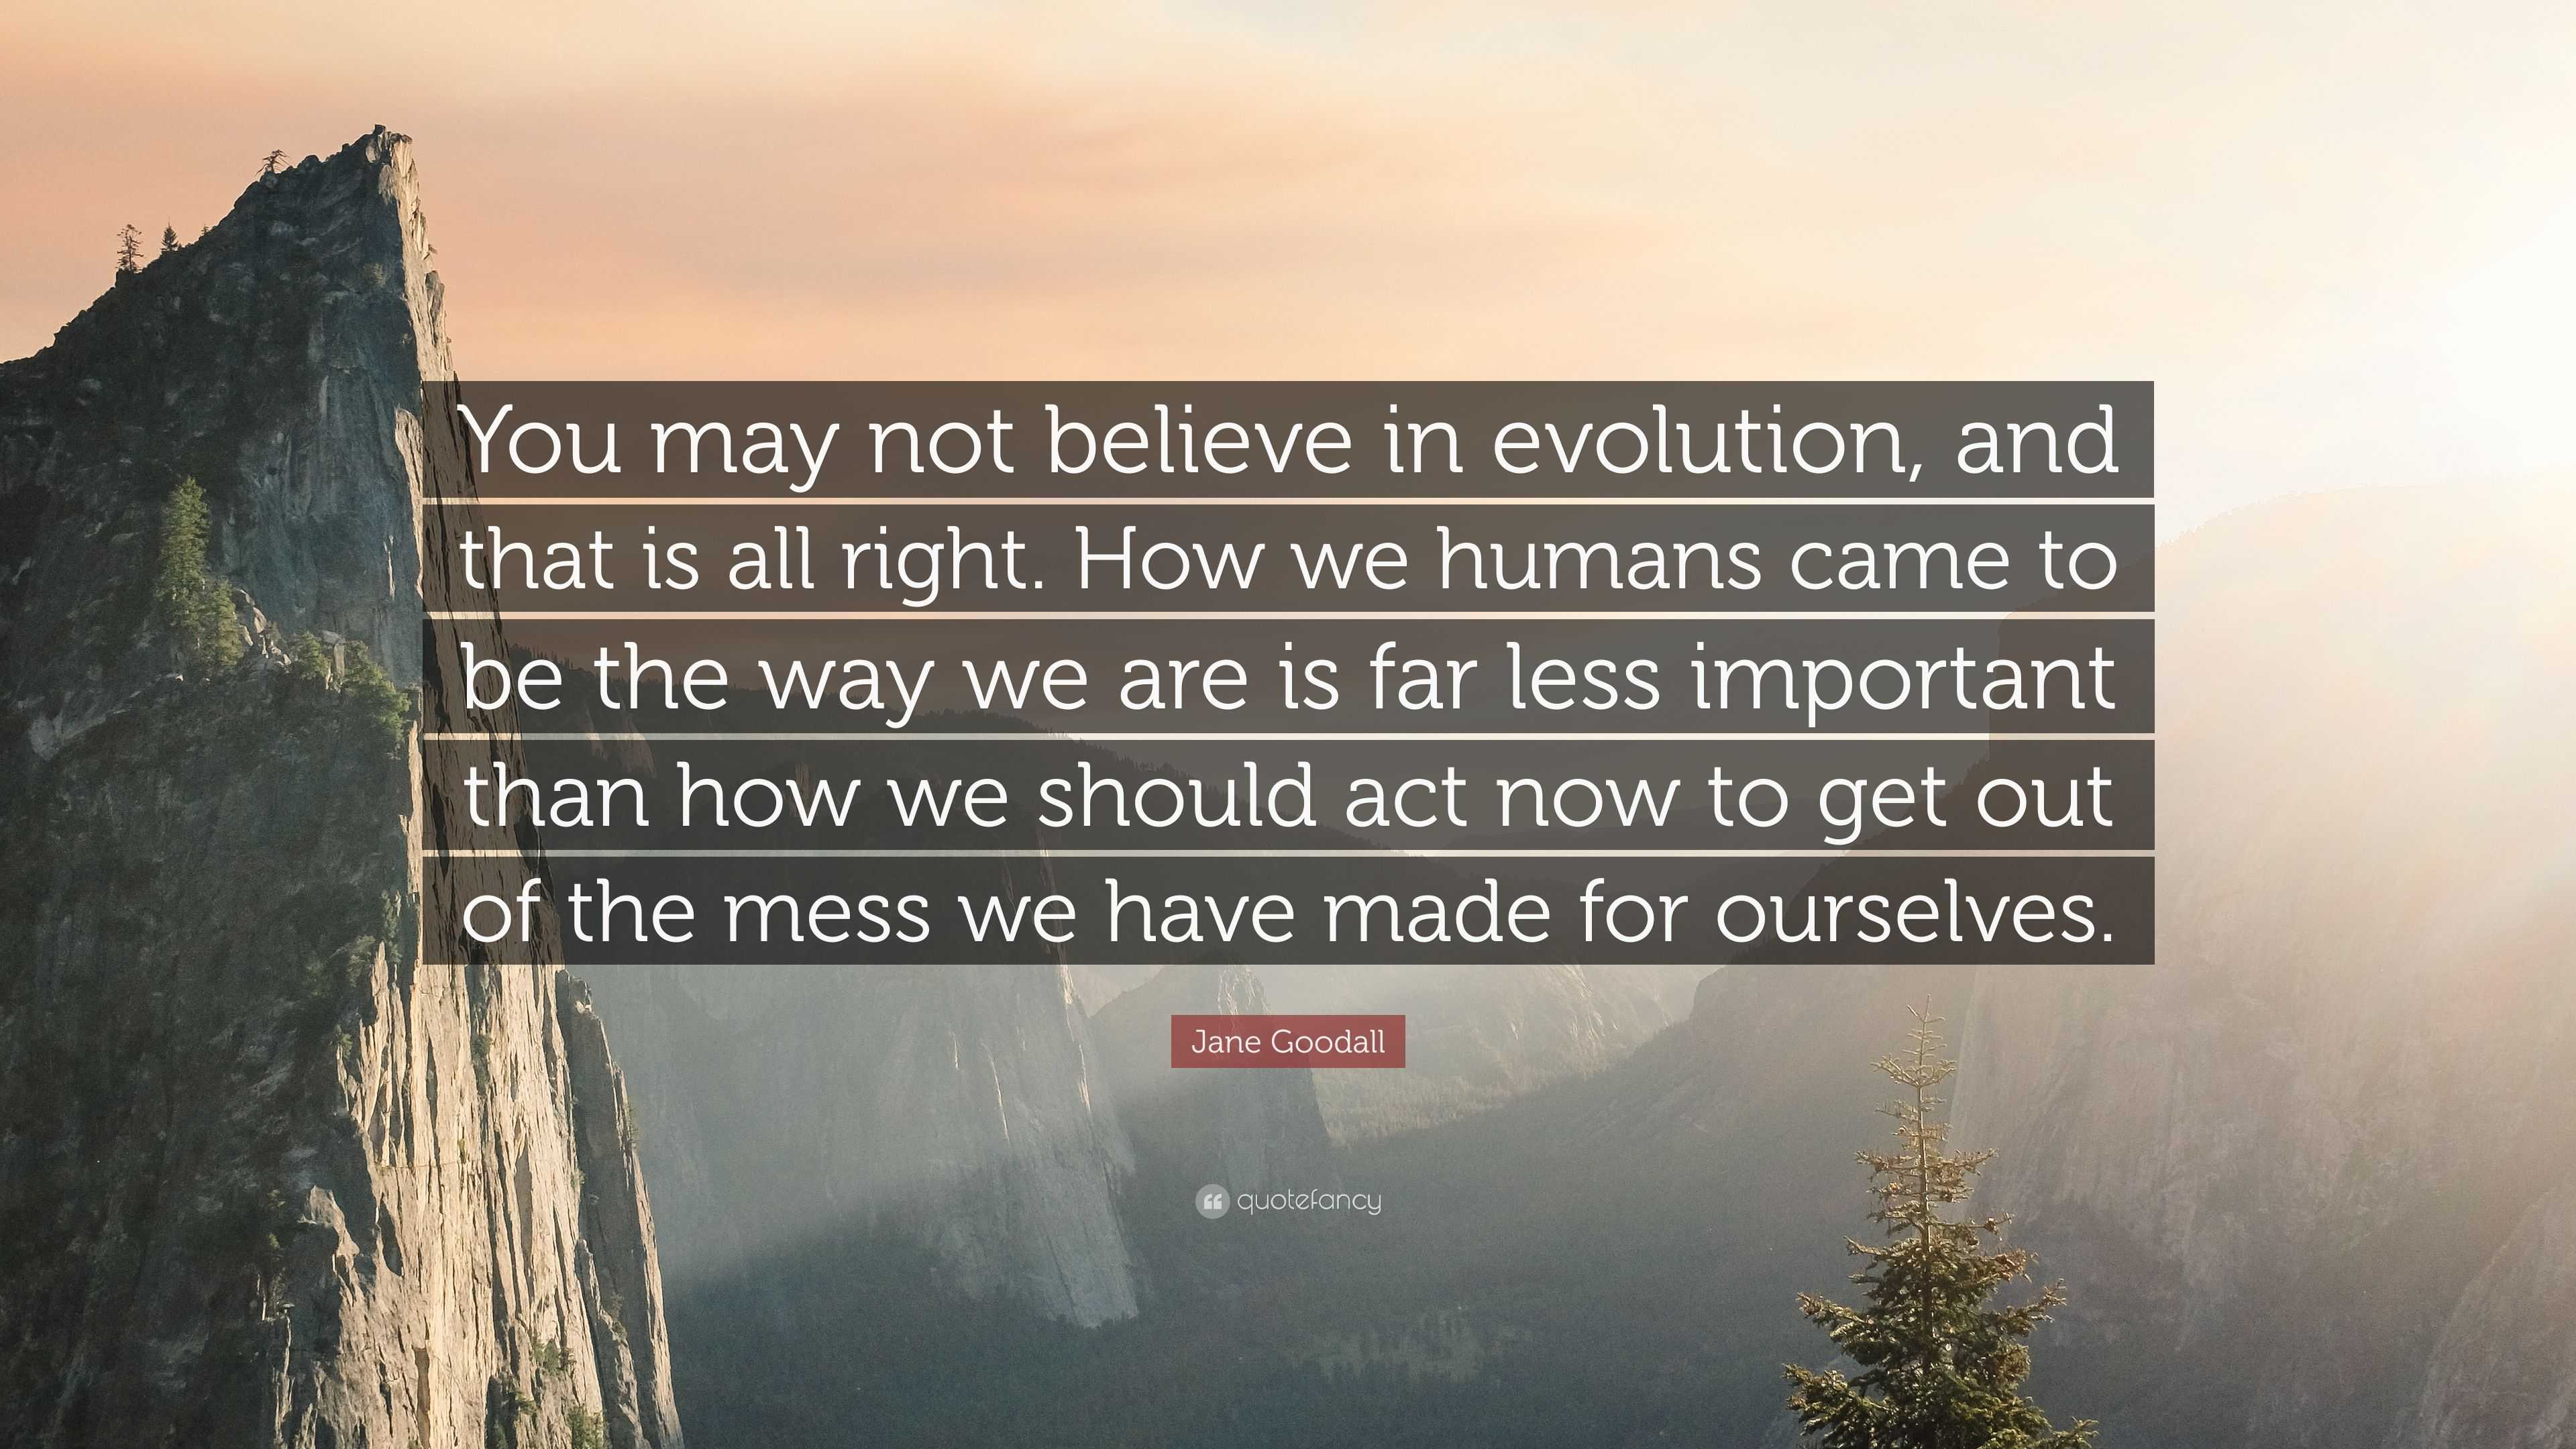 Jane Goodall Quote: “You may not believe in evolution, and that is all ...